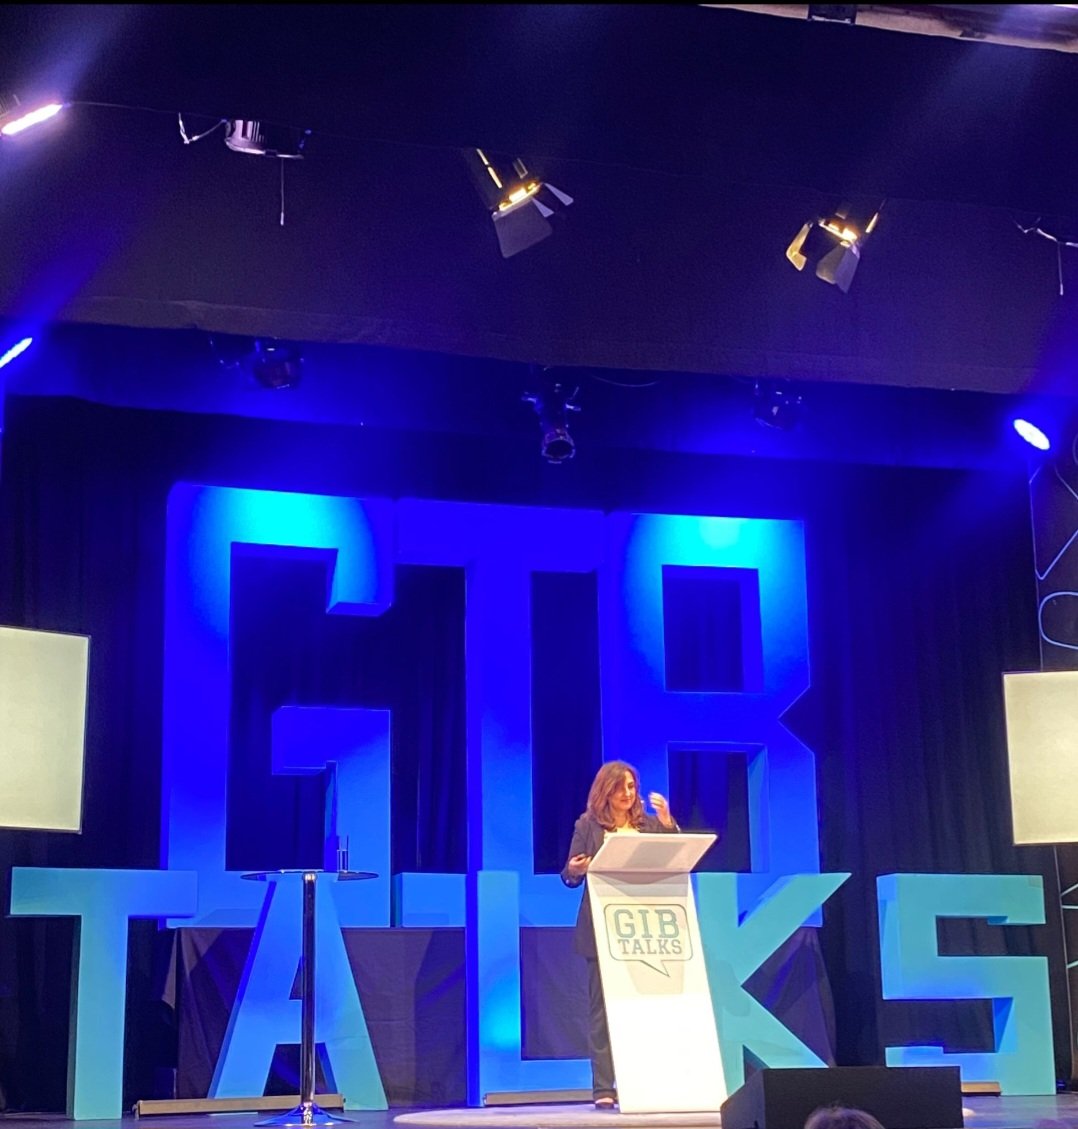 Thank you for having me @gib_talks 🙏Talking about Simon Parkes always breaks me. It's such a tragic story and I think about his parents all the time. Really grateful for all the support in helping them find answers ❤